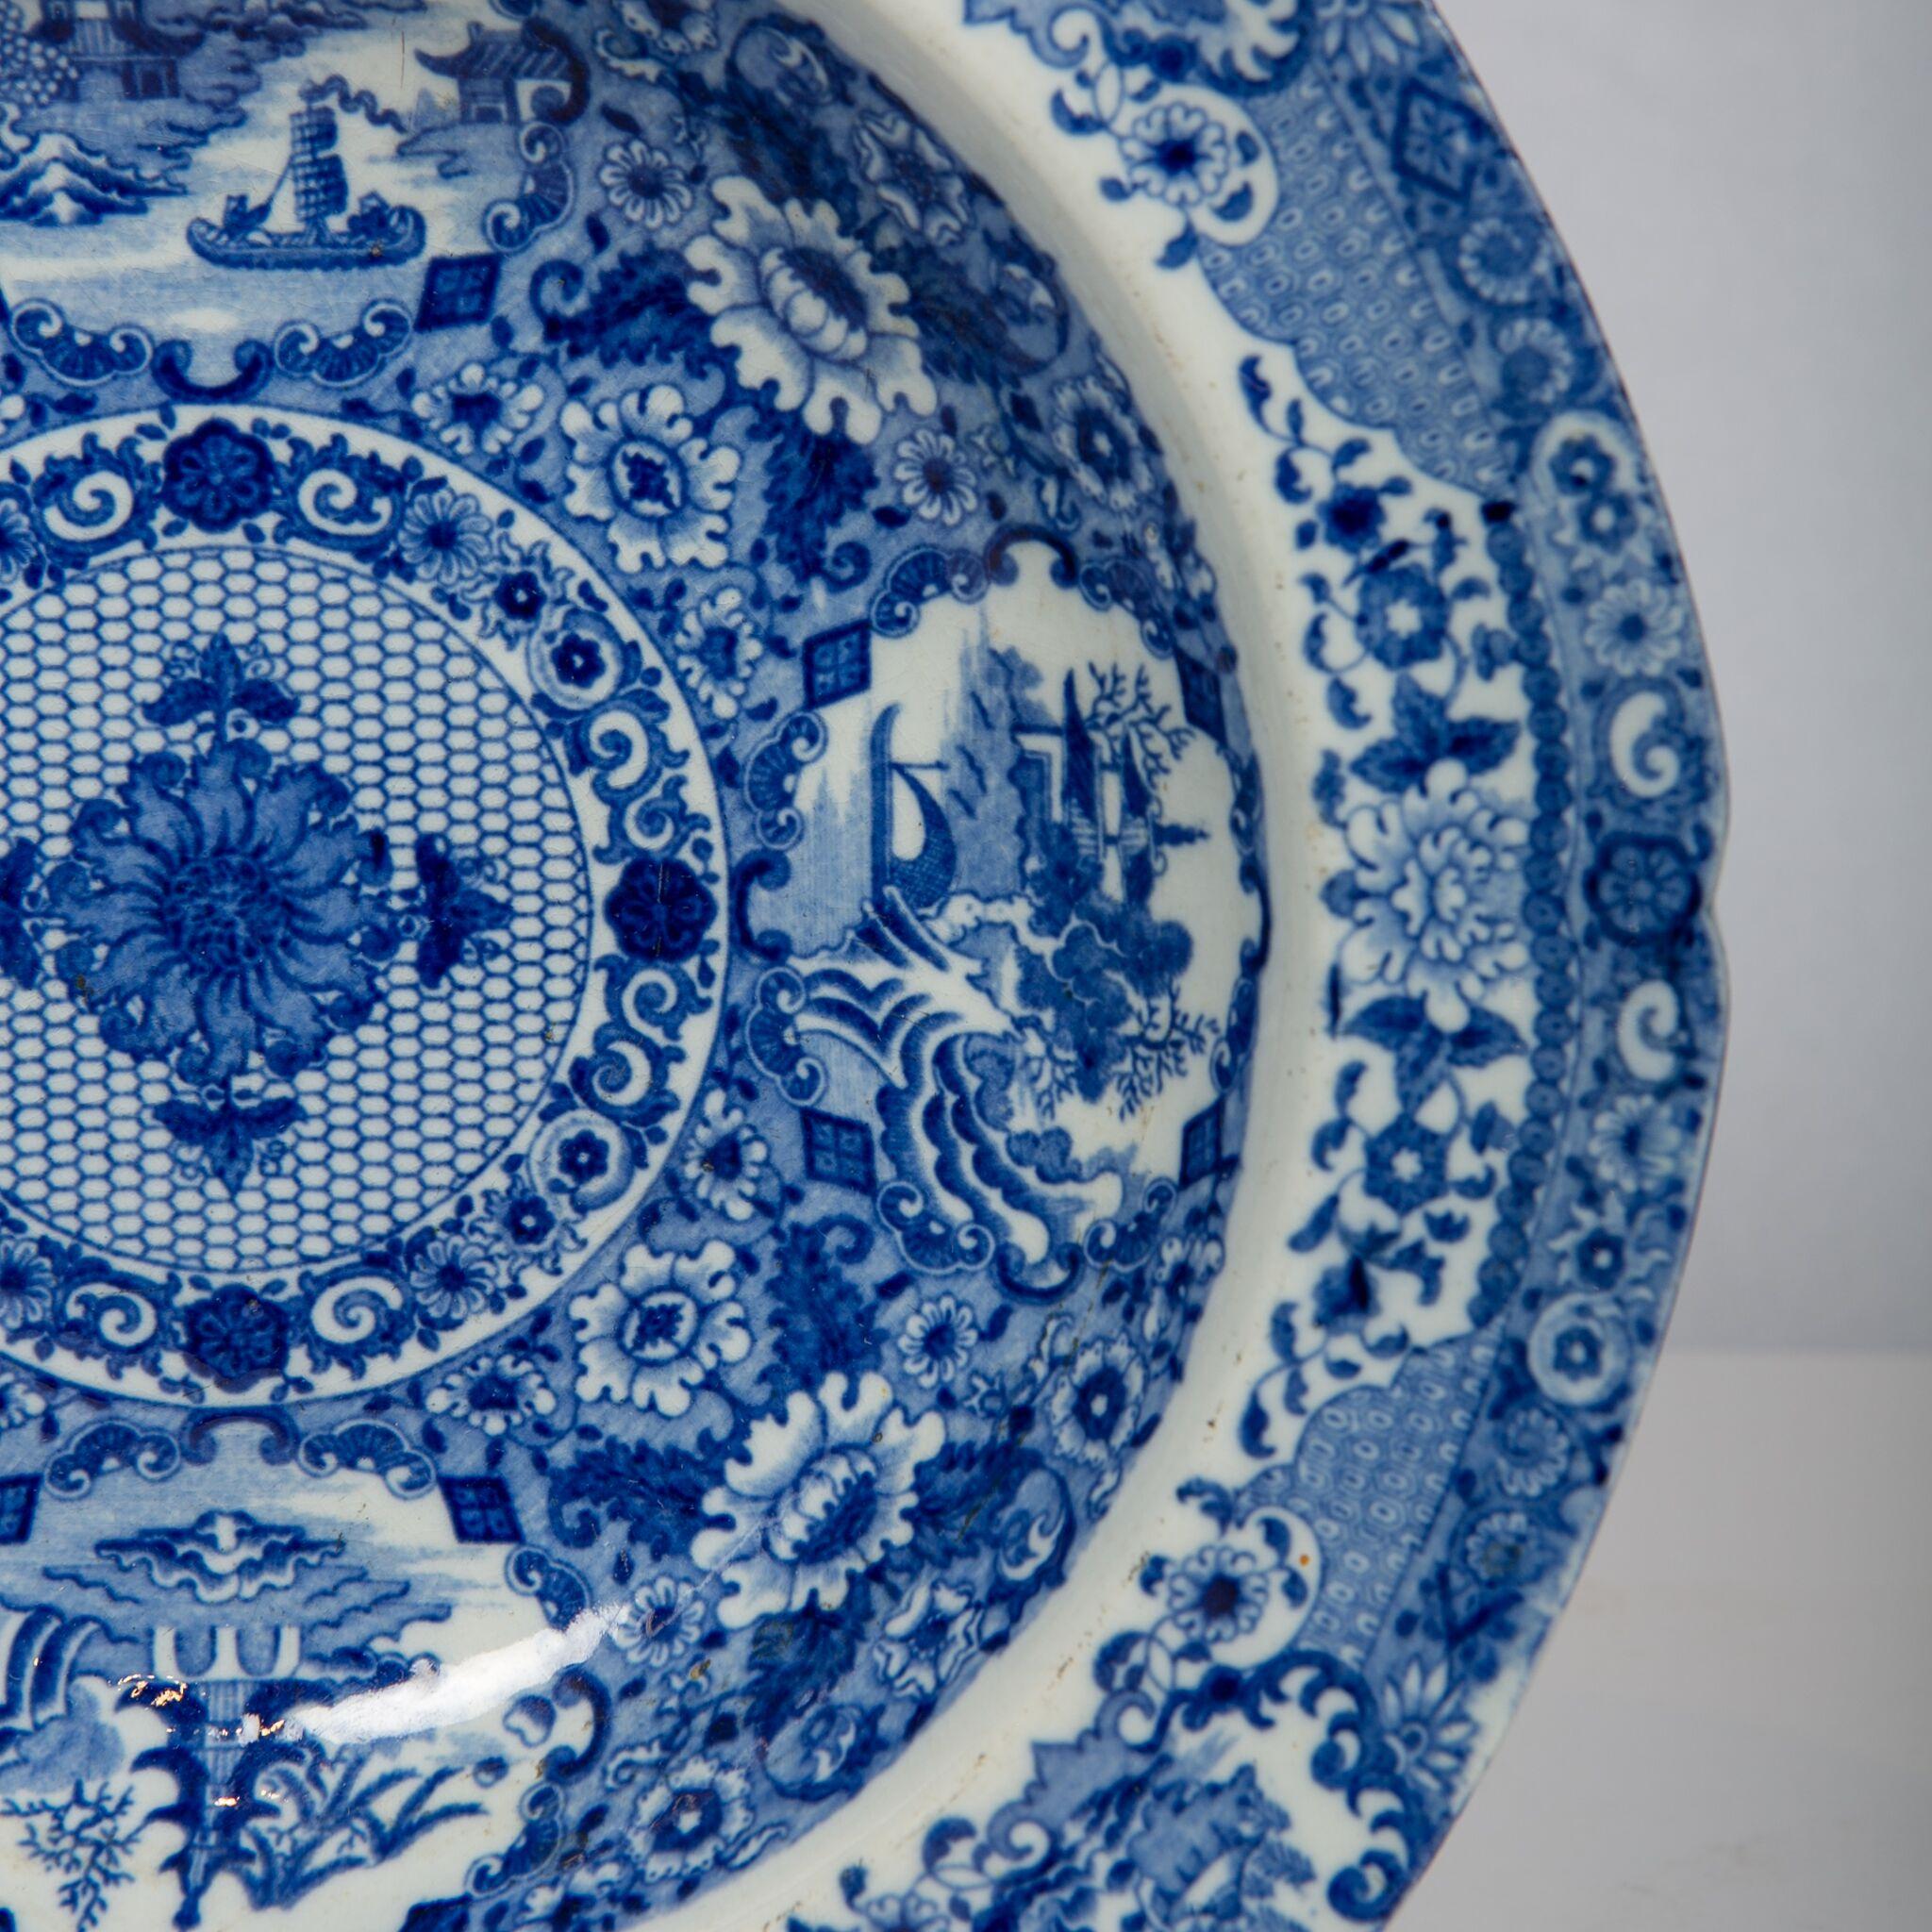 English Five Net Pattern Blue and White Dishes Made Staffordshire England, circa 1820